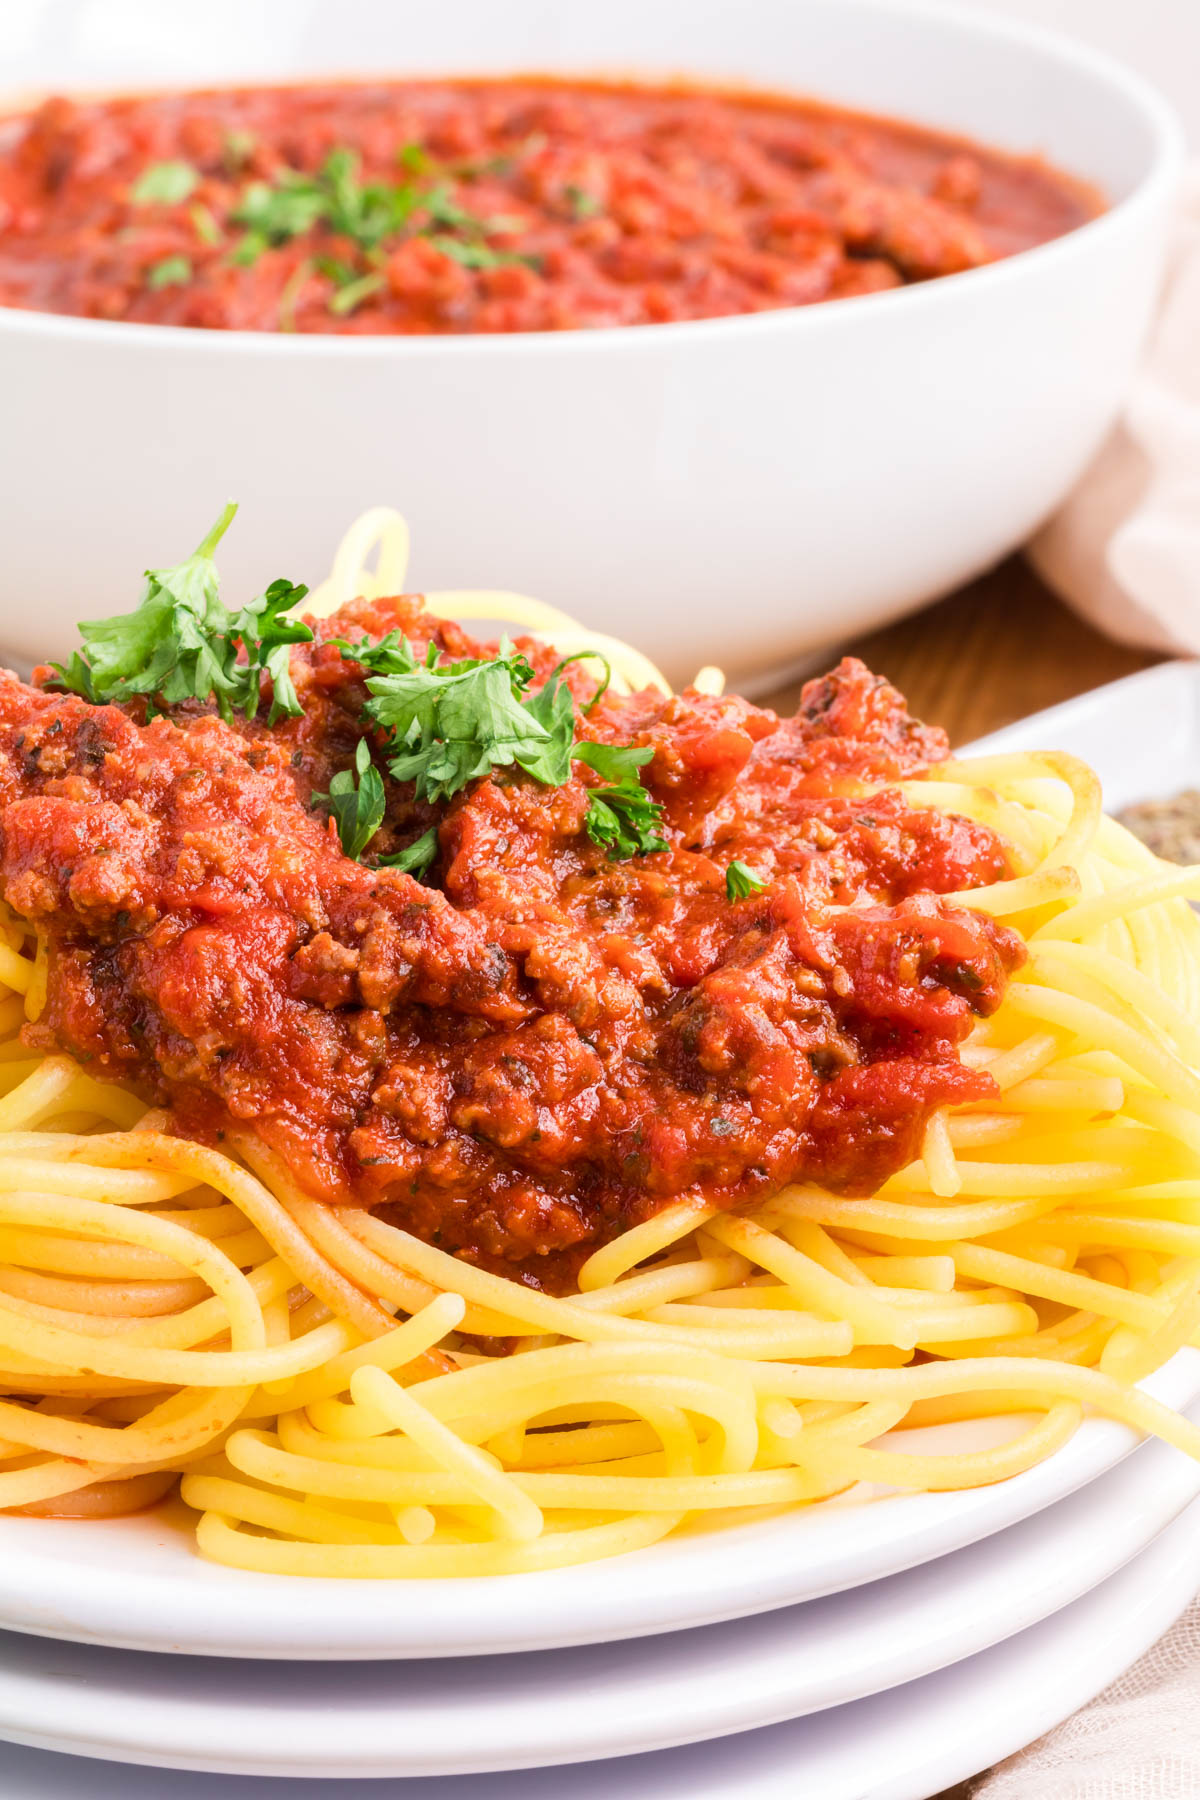 Meat sauce piled on top of a plate of spaghetti noodles.